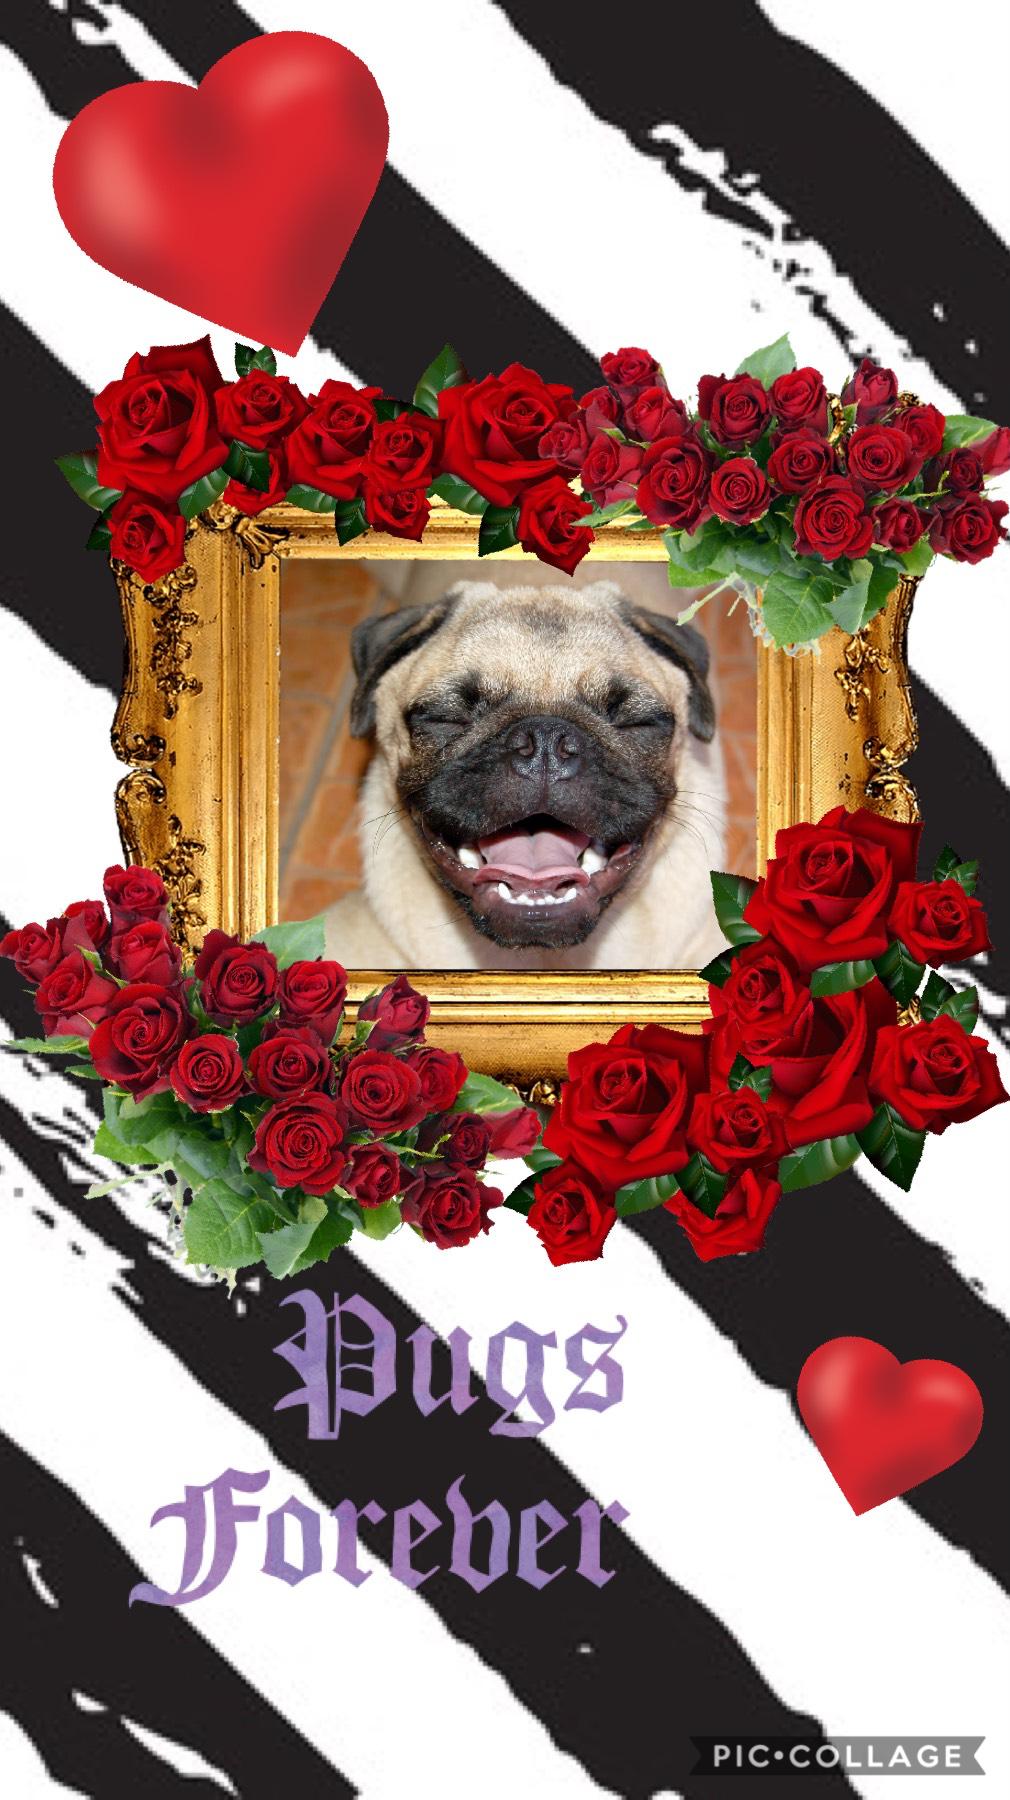 I love pugs anyone else?? Or anyone want me to do another dog breed??